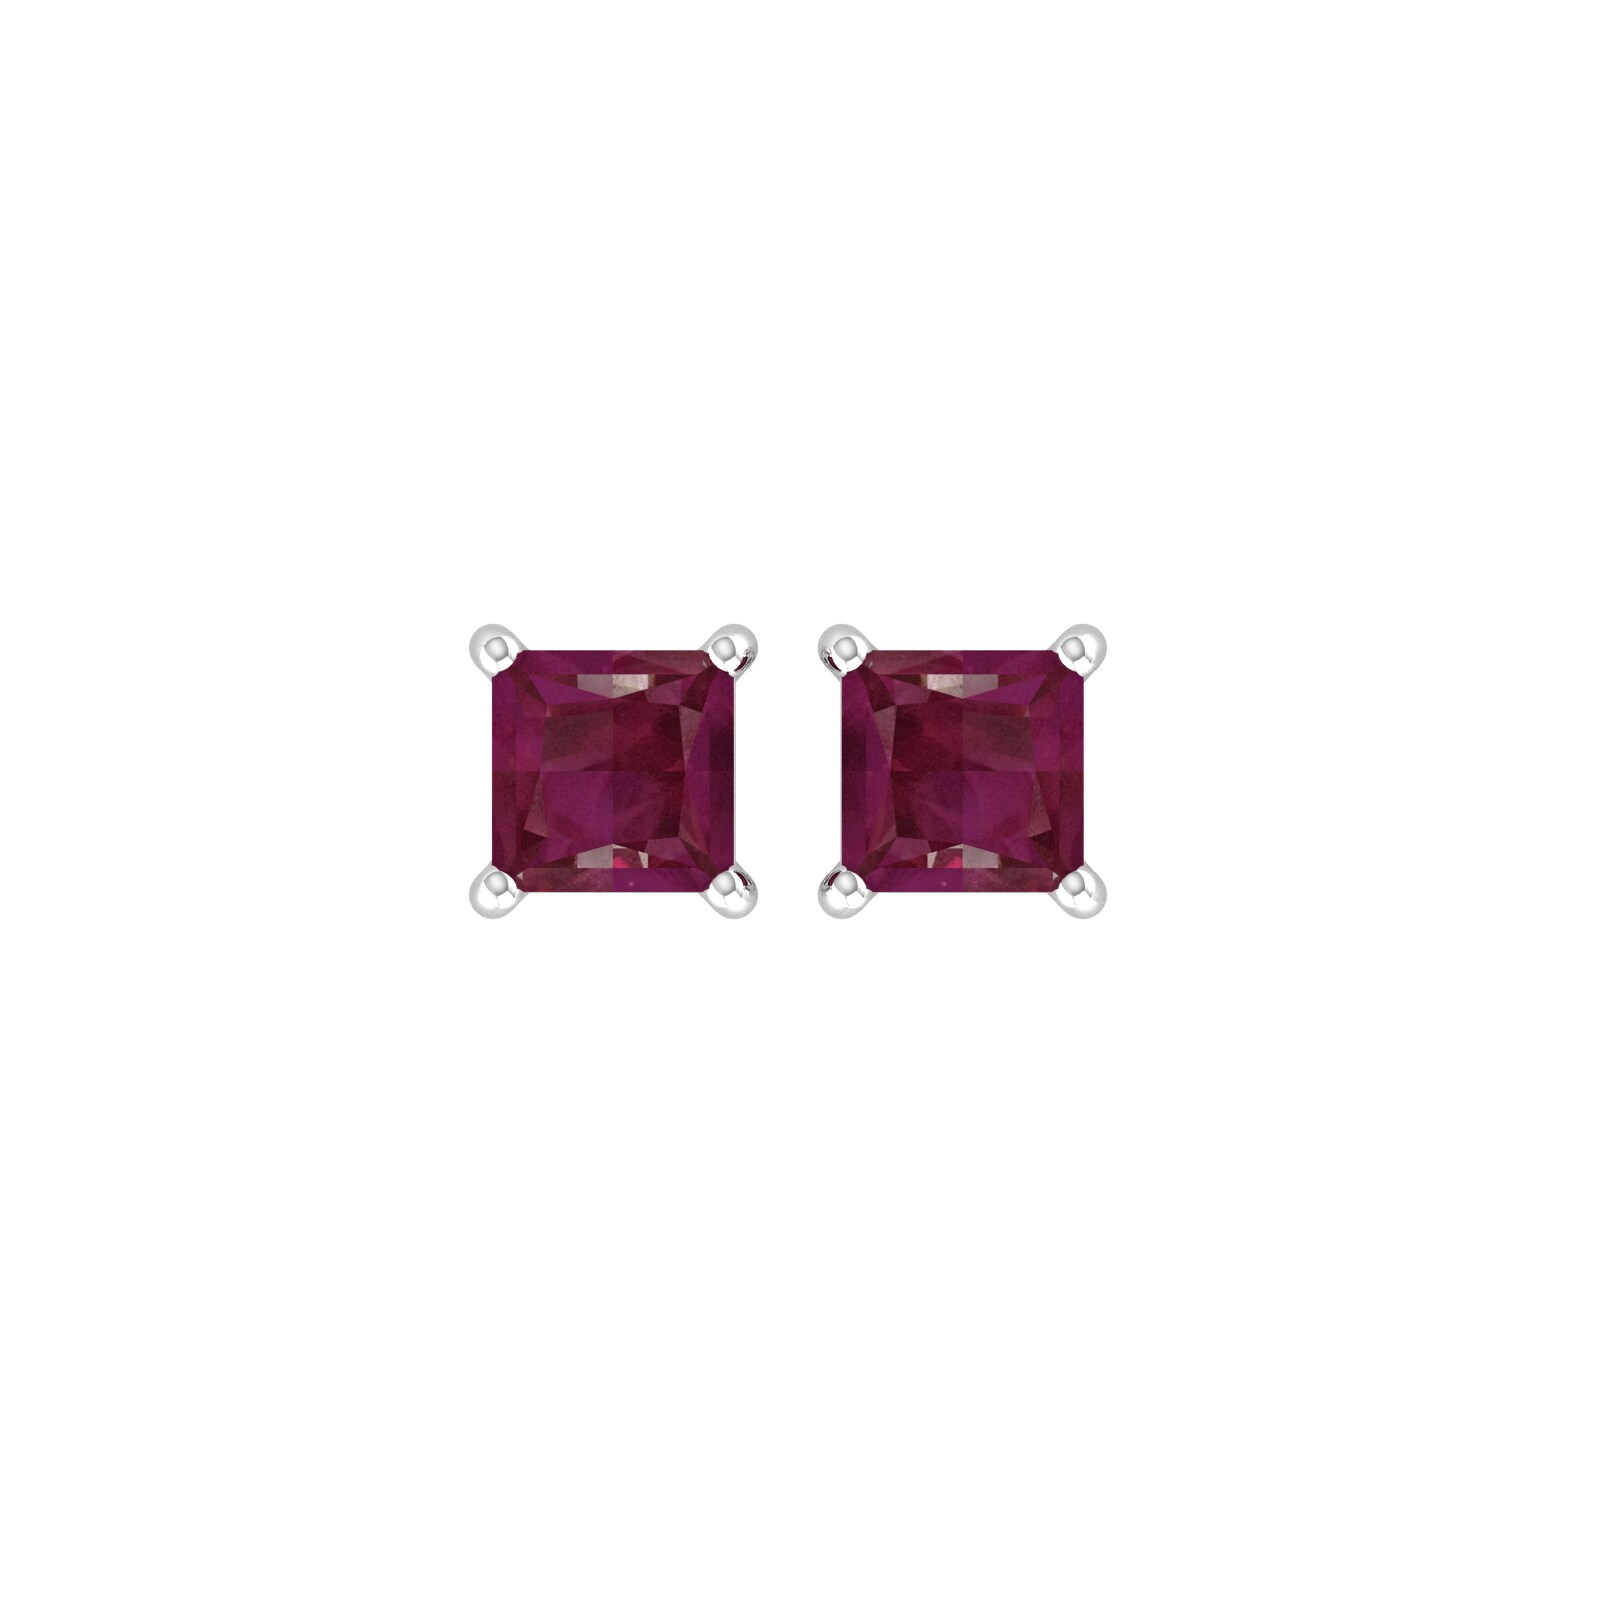 9ct White Gold 4 Claw Square Ruby 5mm x 5mm Stud Earrings